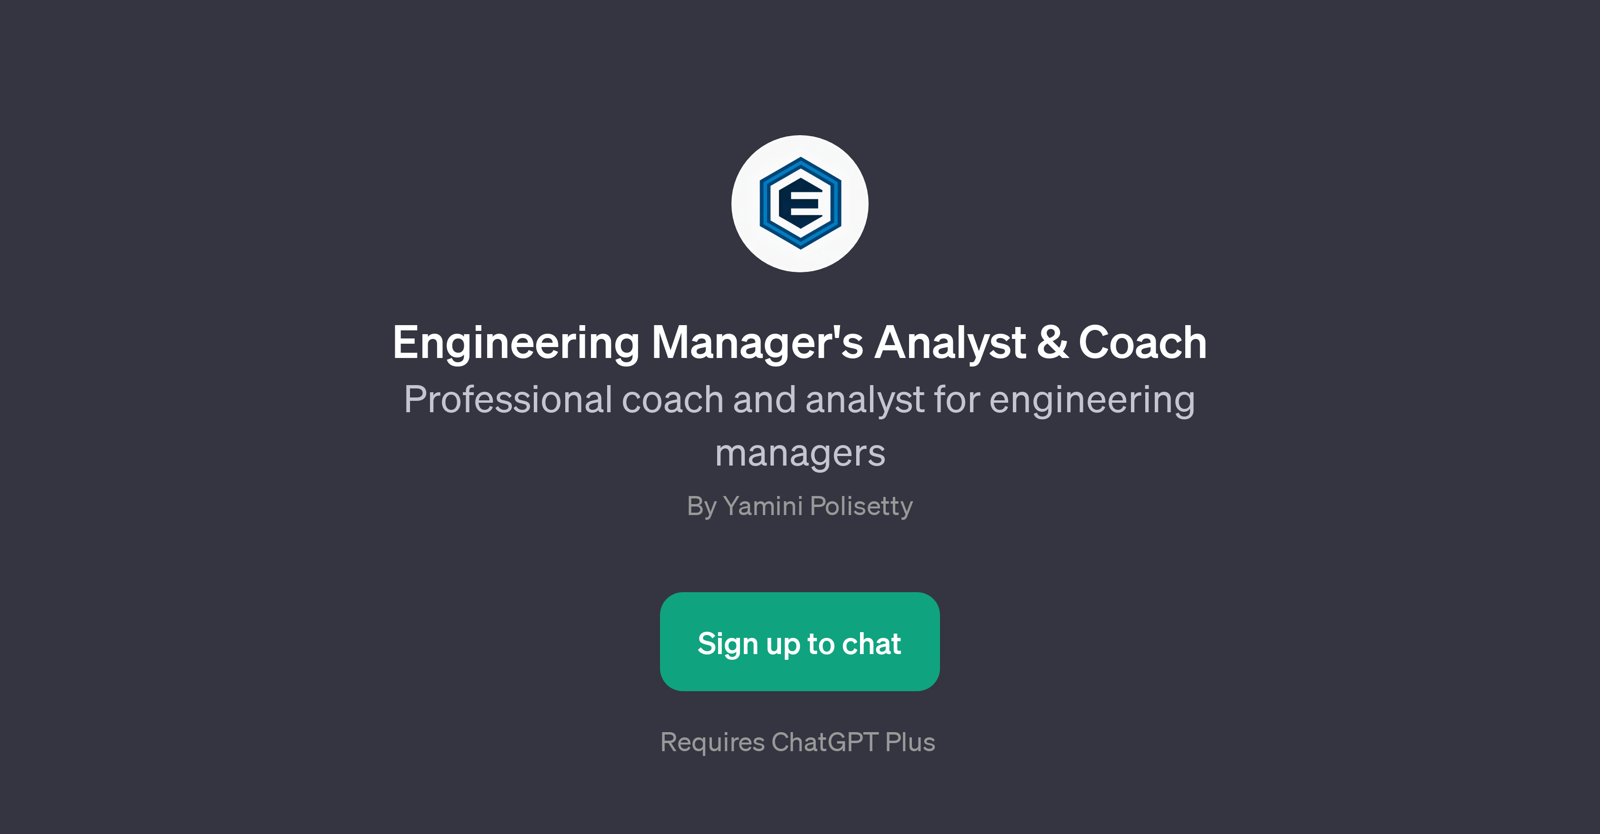 Engineering Manager's Analyst & Coach website